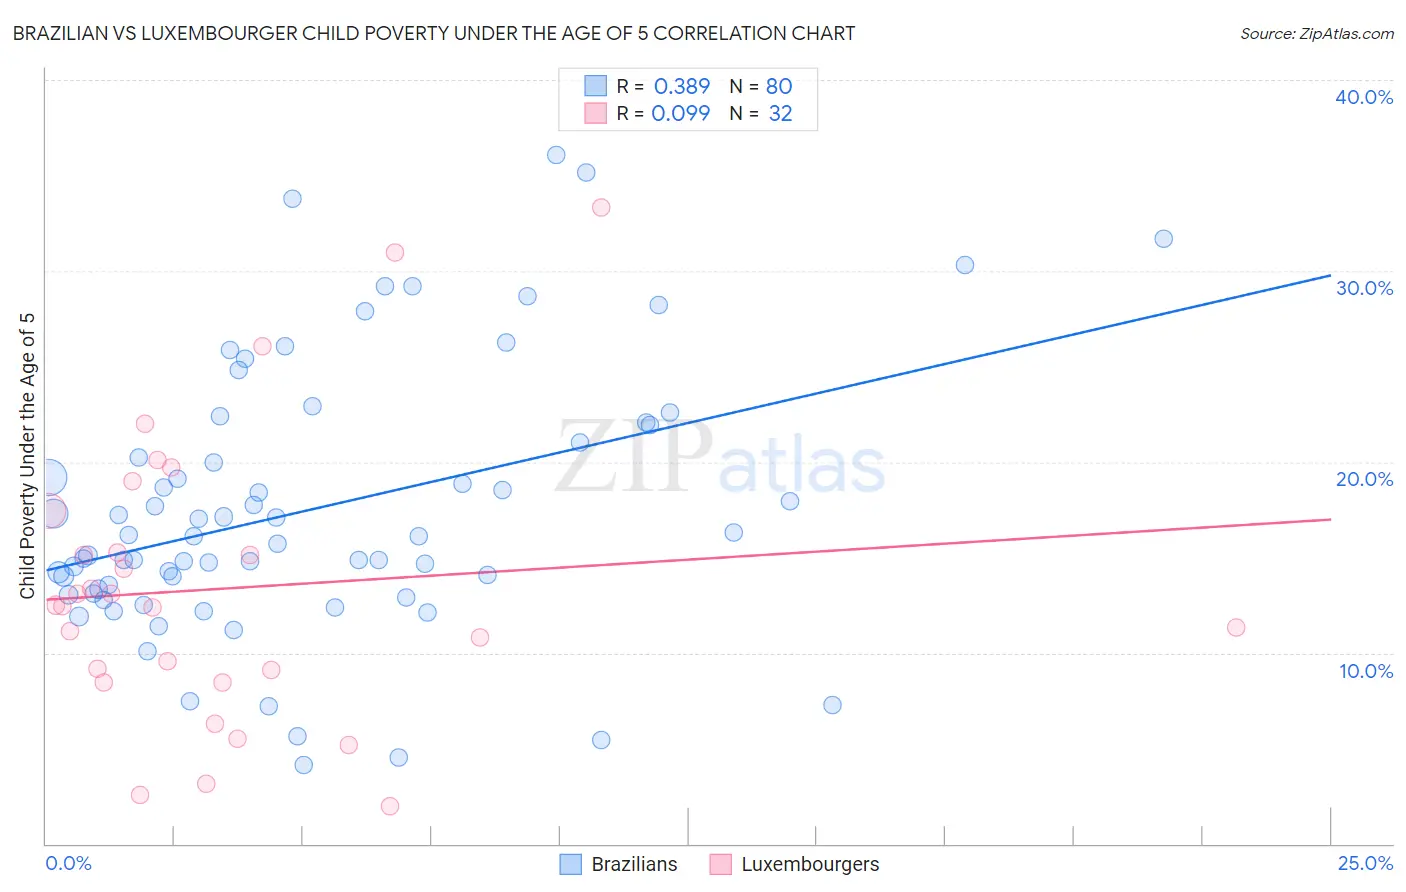 Brazilian vs Luxembourger Child Poverty Under the Age of 5